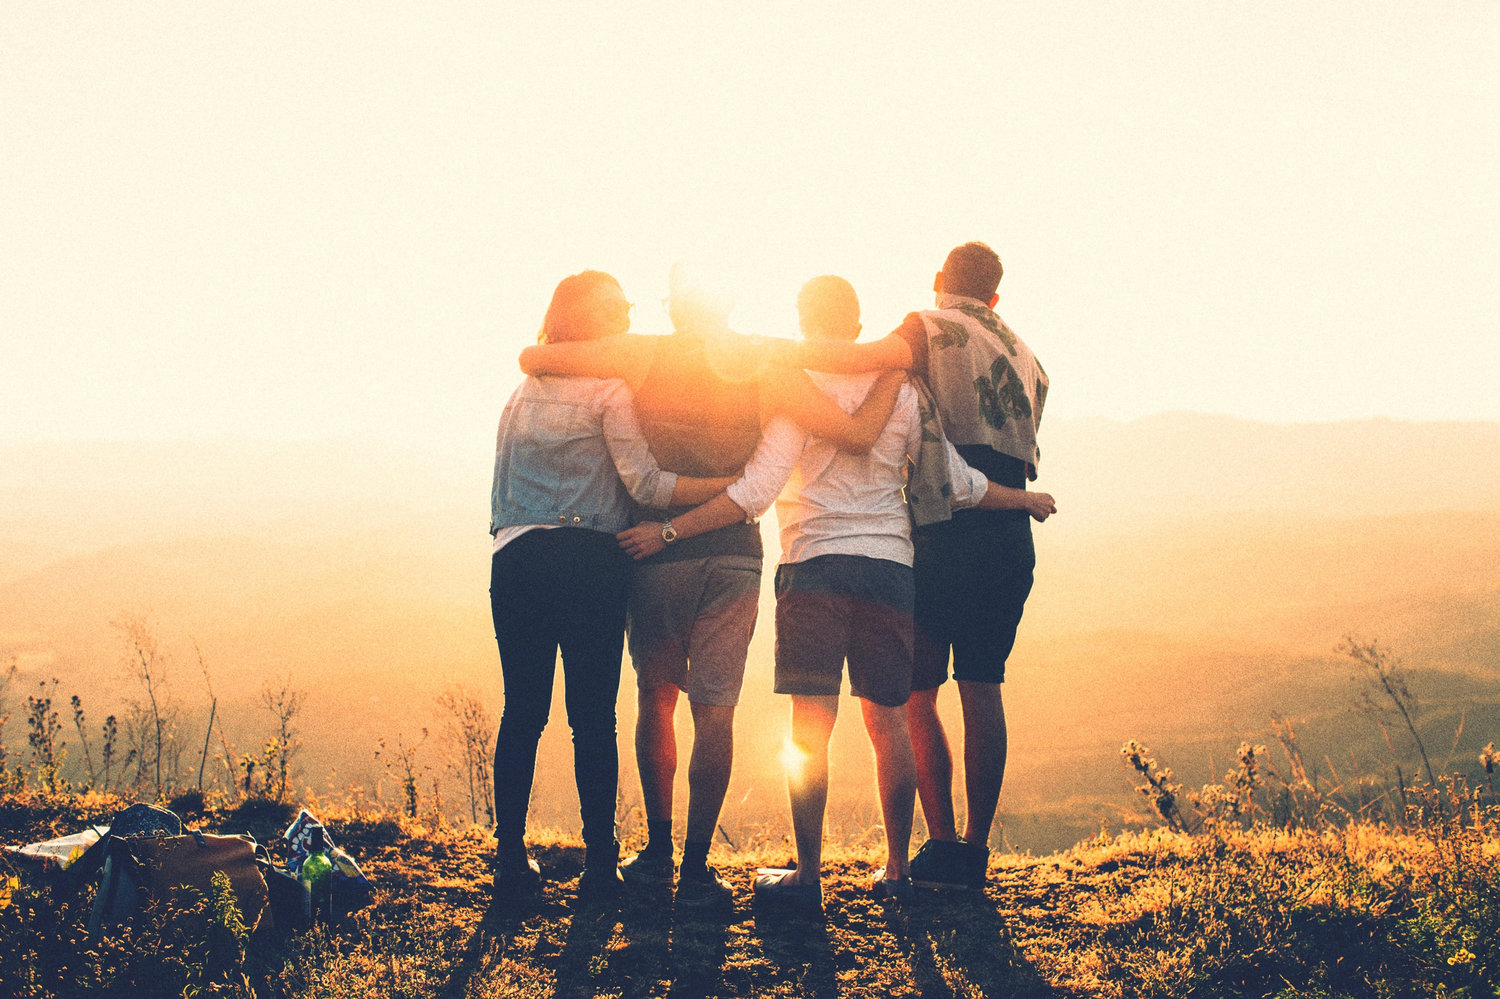 Survival Of The Friendliest: How Our Close Friendships Help Us Thrive